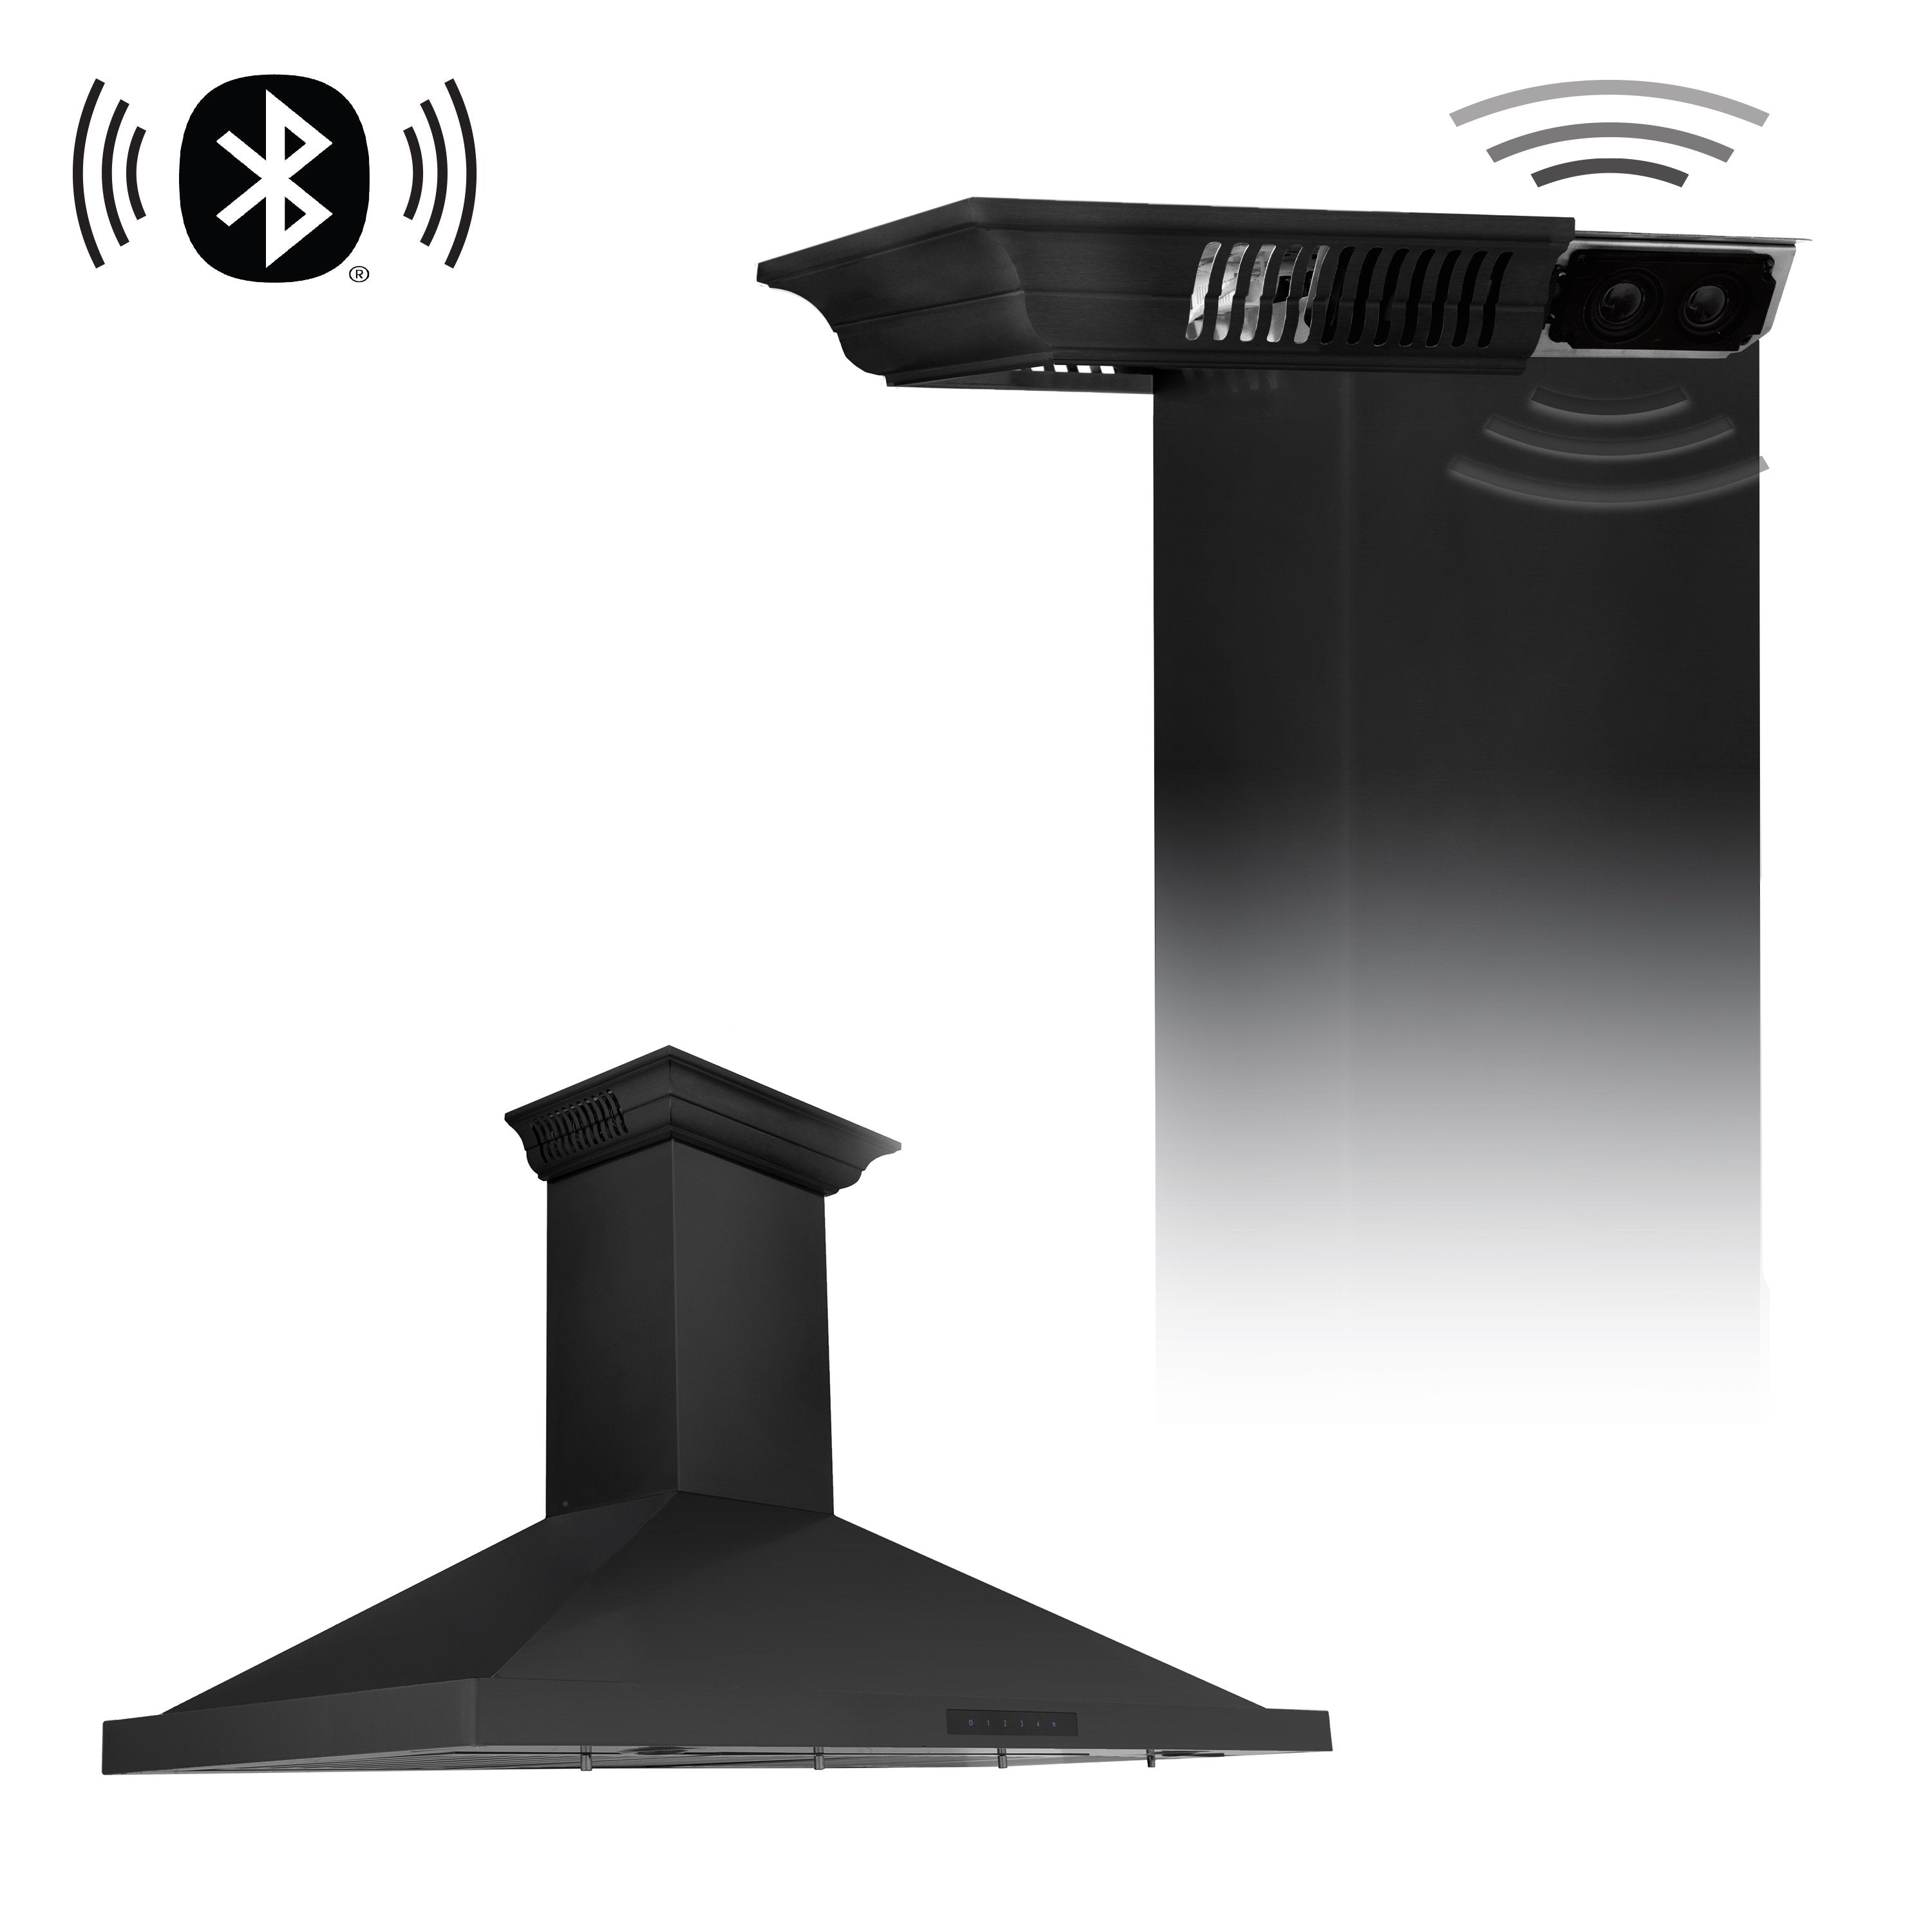 48" ZLINE CrownSound‚ Ducted Vent Wall Mount Range Hood in Black Stainless Steel with Built-in Bluetooth Speakers (BSKBNCRN-BT-48)